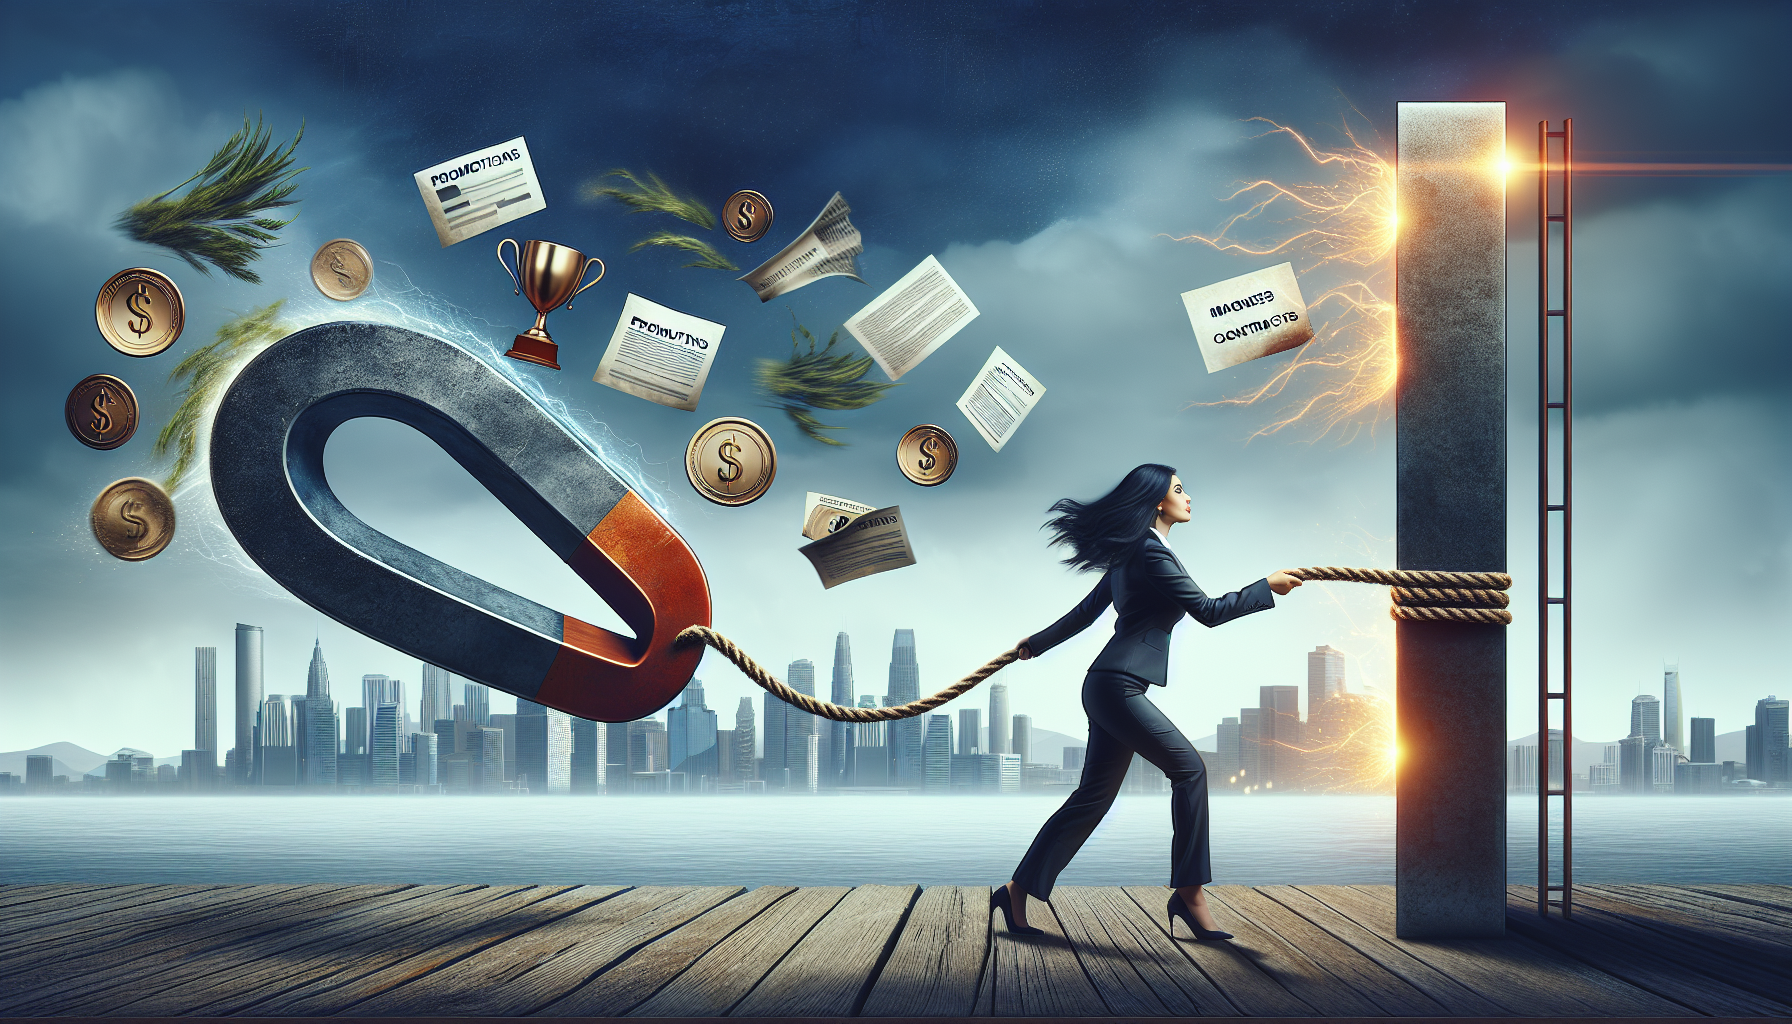 Visual representation of the concept of harnessing the Law of Attraction for career and business success. The main focus could be an abstract metaphorical scene: a strong South Asian woman in a formal business suit pulling a massive magnetic horseshoe toward her with a rope. The horseshoe is attracting symbols of career success like promotions leaflets and notes, business contracts, and a shiny golden trophy. In the far background, we see a bustling cityscape symbolizing the business world. The mood is one of determination, focus, and anticipation of success.